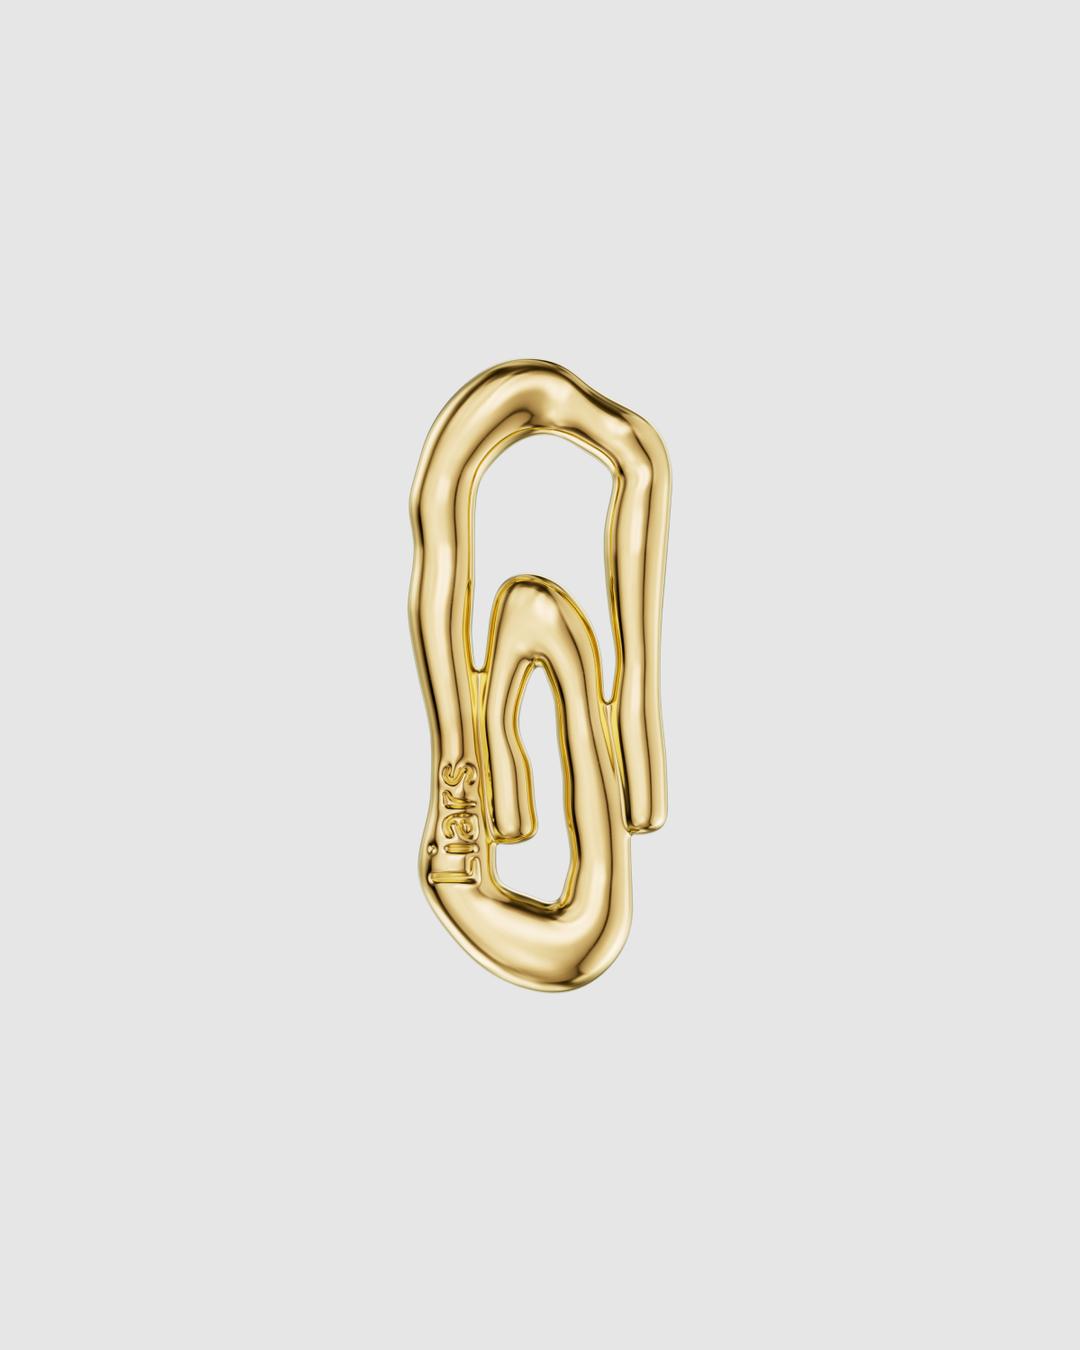 New Nature paper clip trinket gold plated